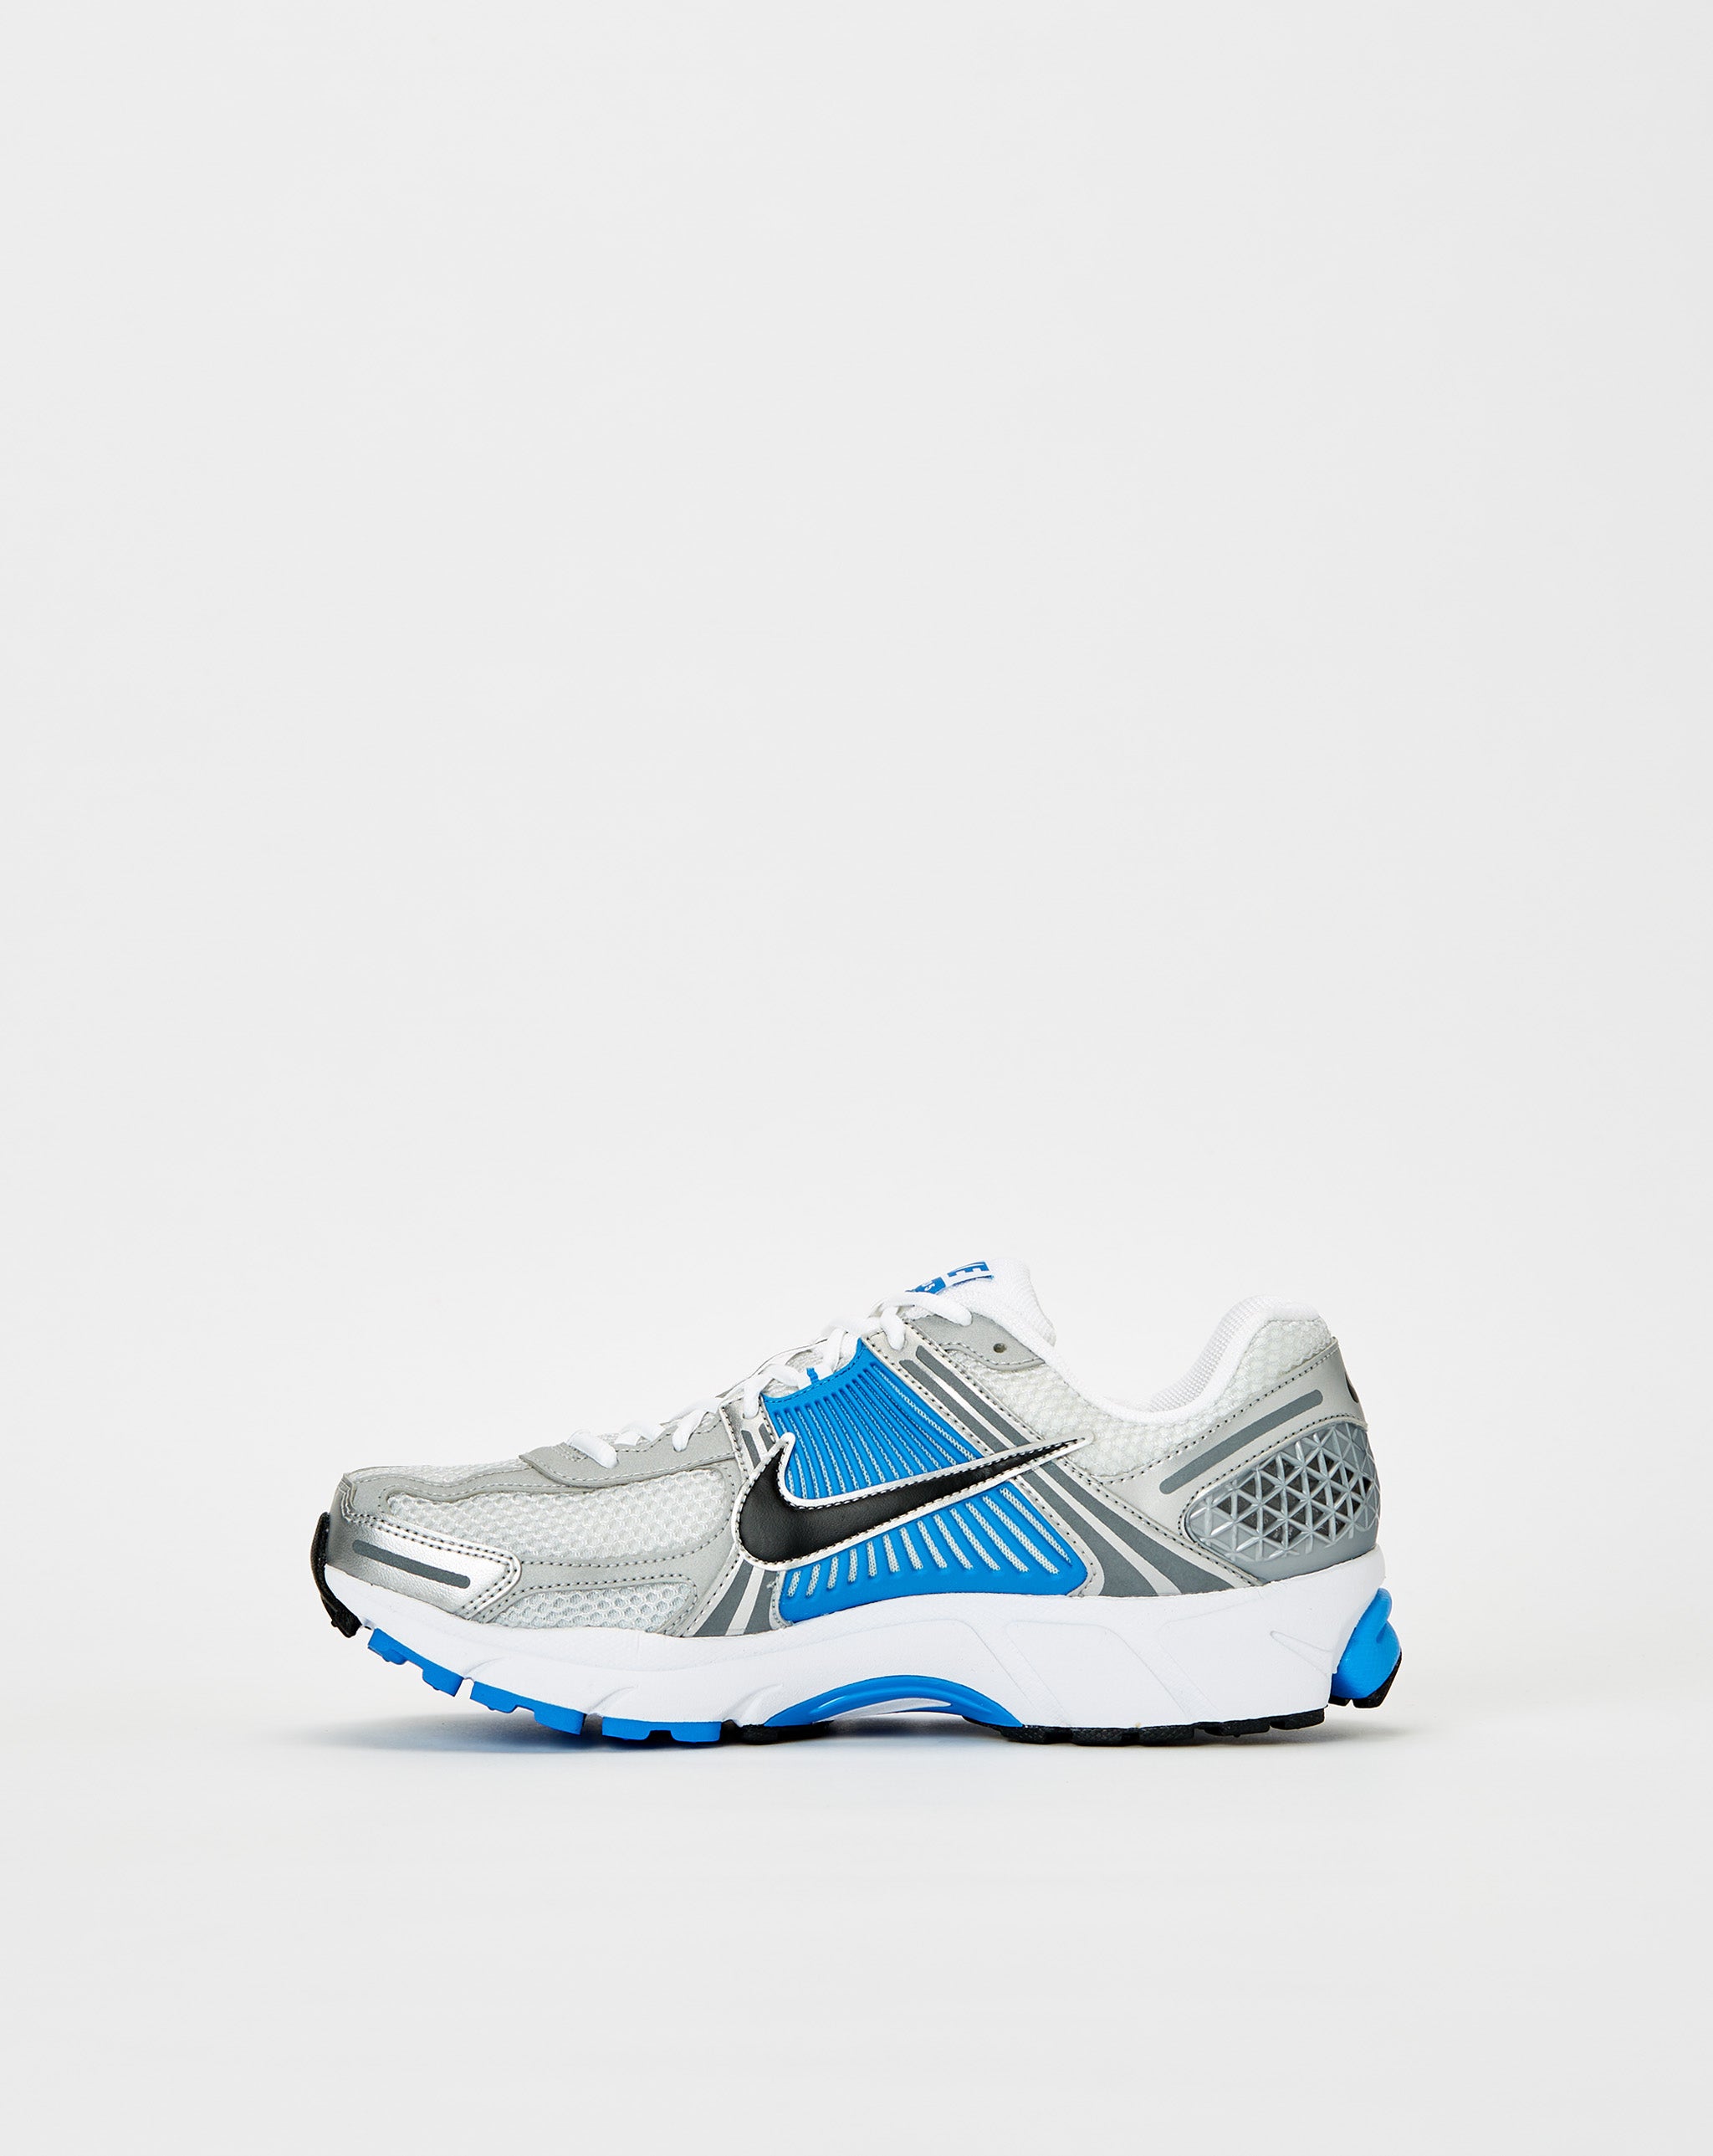 Nike Safety detailsThis running pack has a safety whistle and reflective prints for great visibility  - Cheap Urlfreeze Jordan outlet